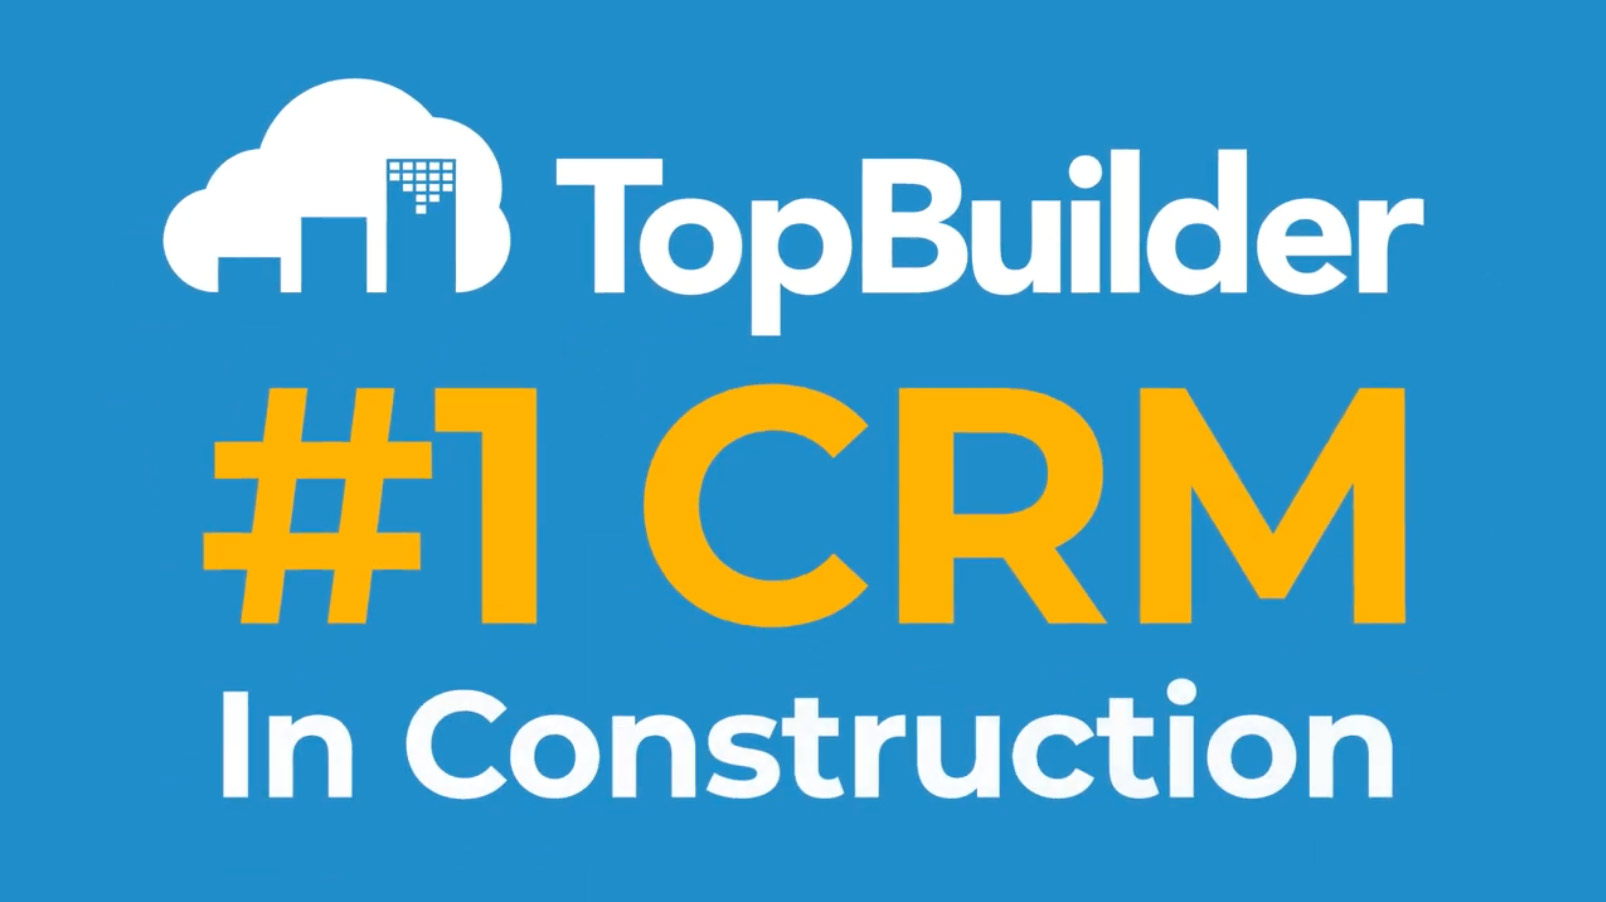 Number 1 CRM for Construction